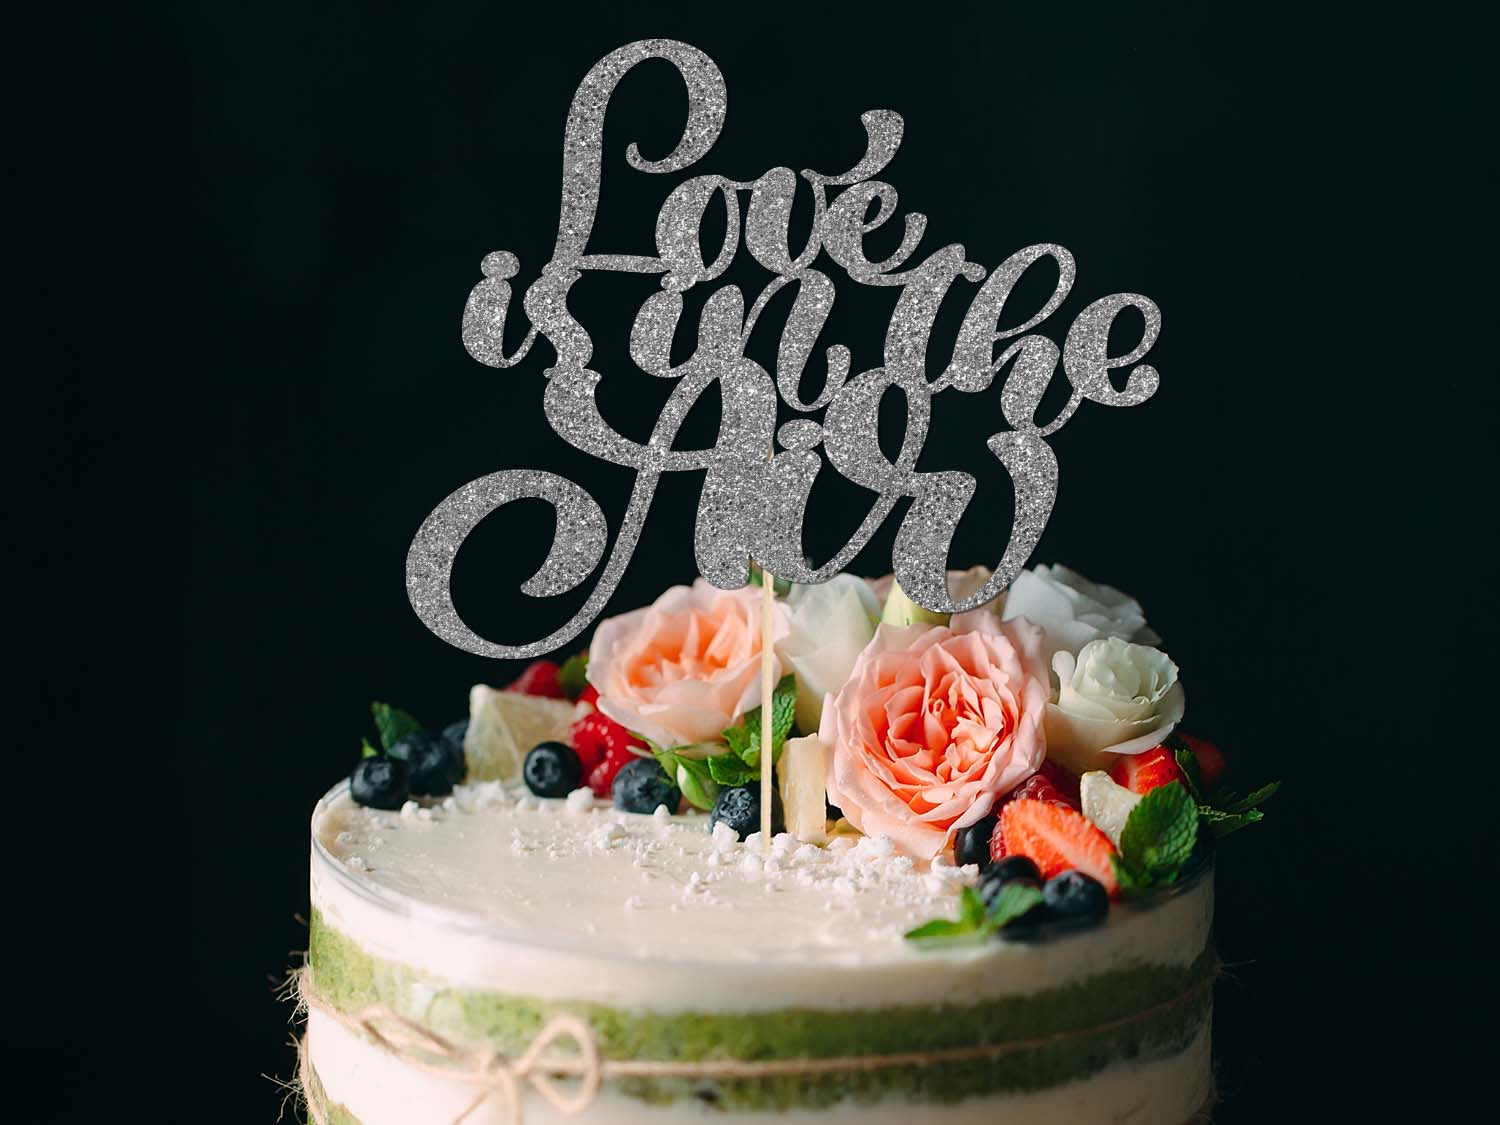 Love is in the air Cake Topper, Engagement Anniversary Cake Decoration Ireland